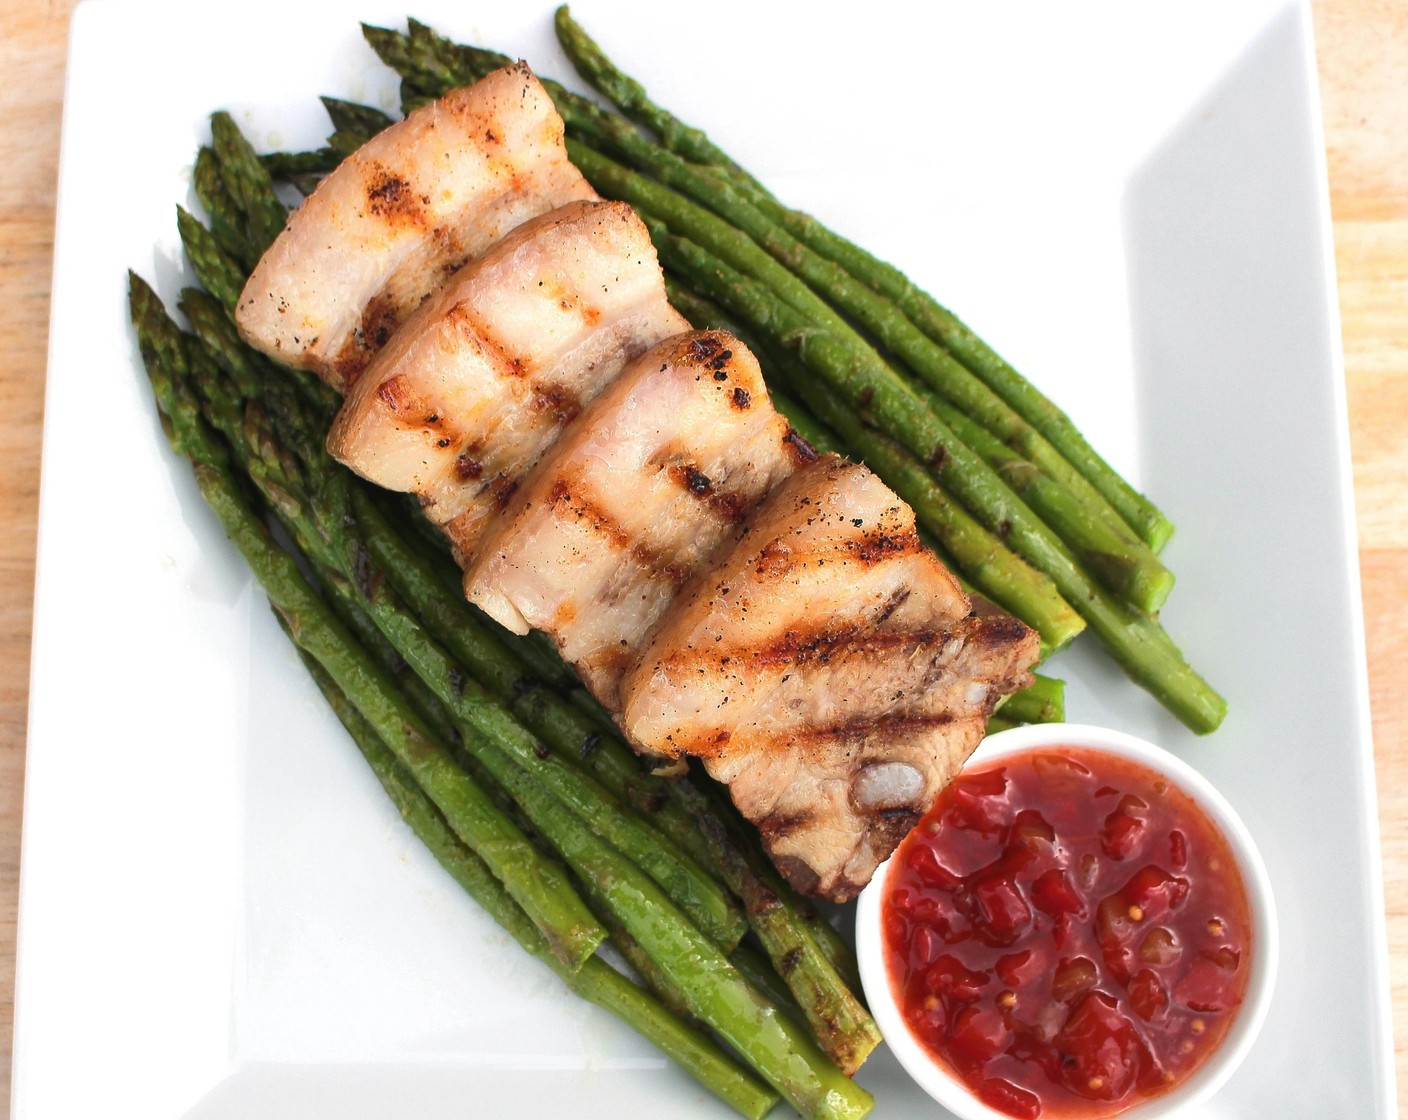 Grilled Pork Belly and Green Asparagus